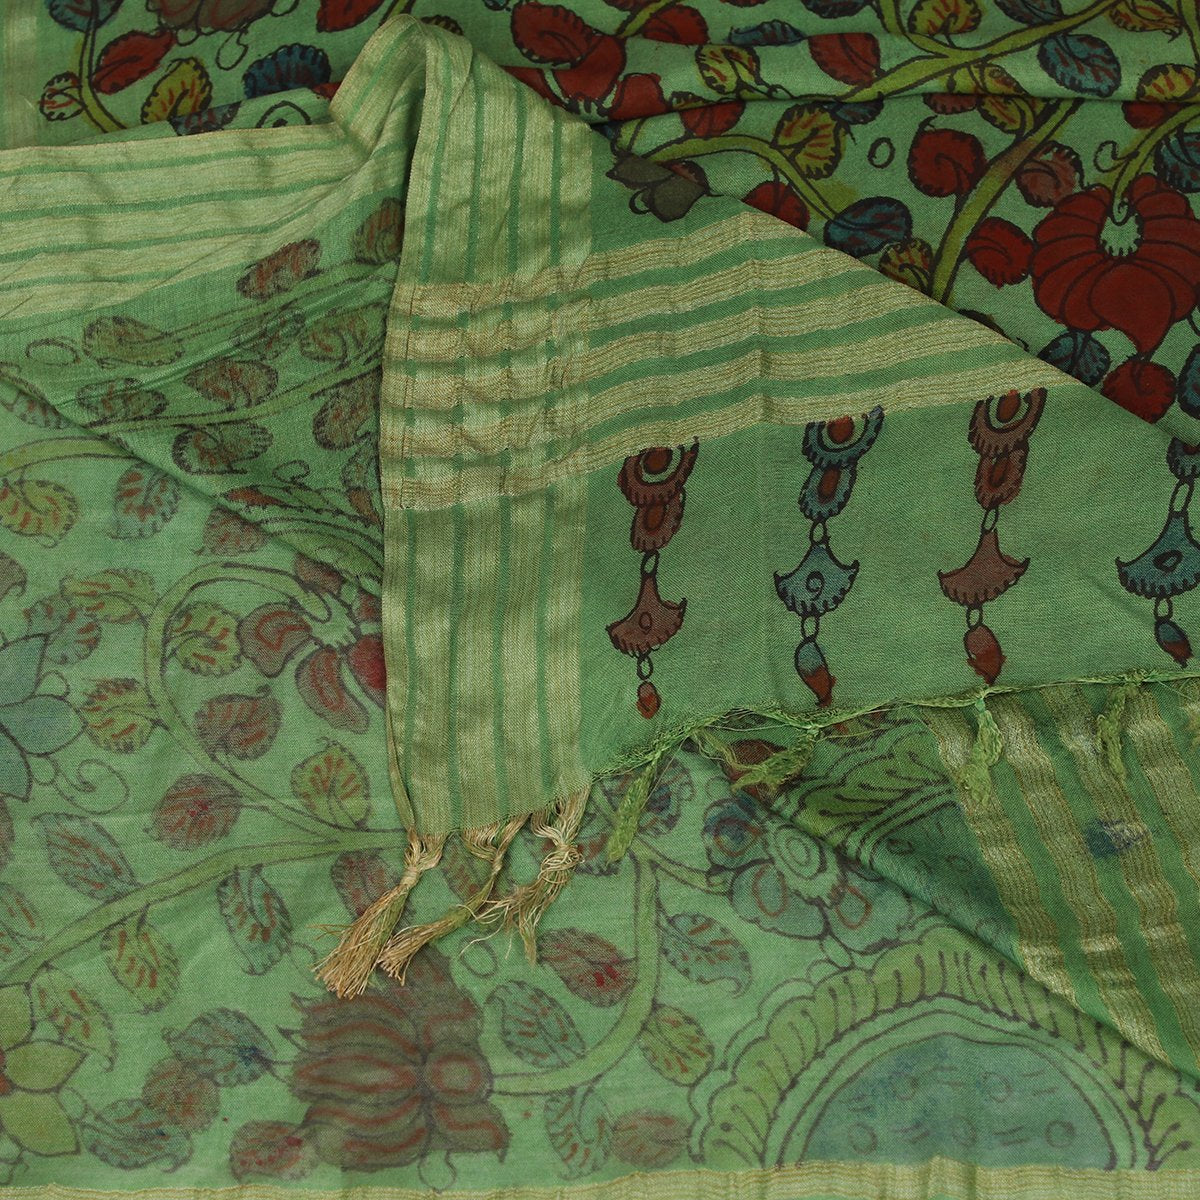 Green Color Handcrafted Kalamkari Printed Pure Cotton Dupatta with Tassels